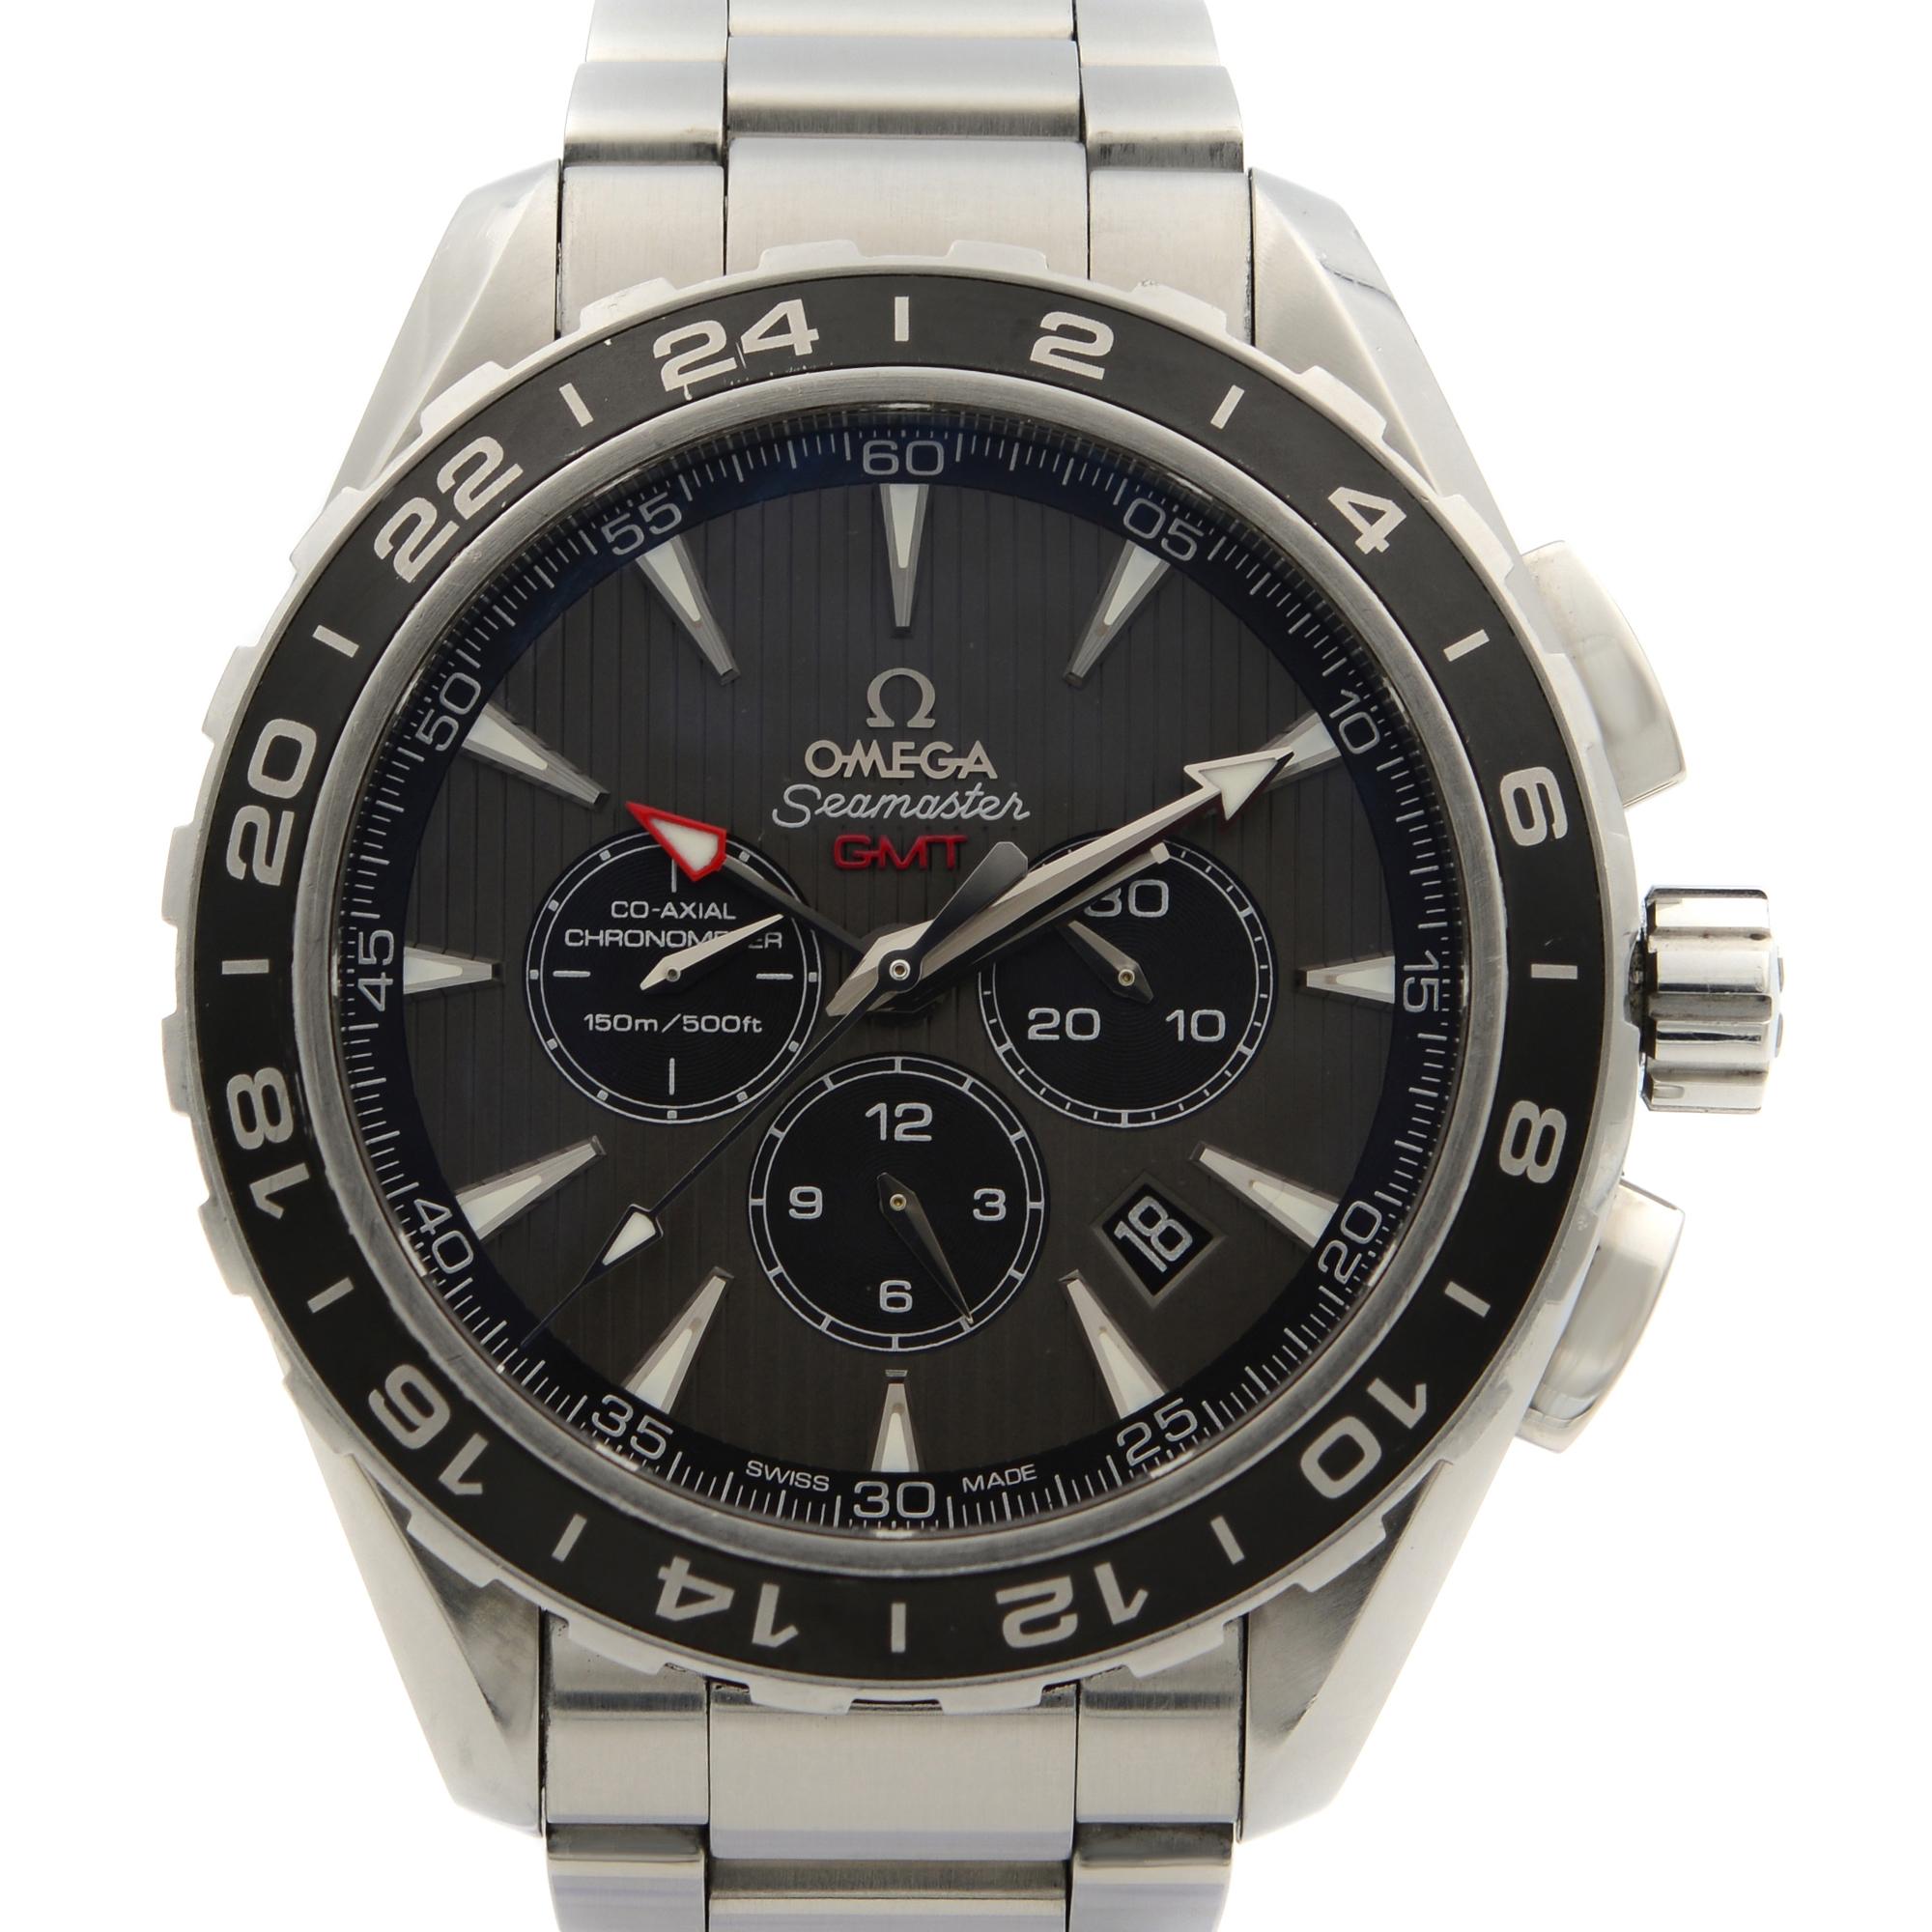 Minor scratches on the bezel insert. This watch comes with a manufacturer's box and authentication card.
Details:
MSRP 9250
Model Number 231.10.44.52.06.001
Brand OMEGA
Department Men
Style Sport
Model Omega Seamaster
Band Color Steel
Dial Color